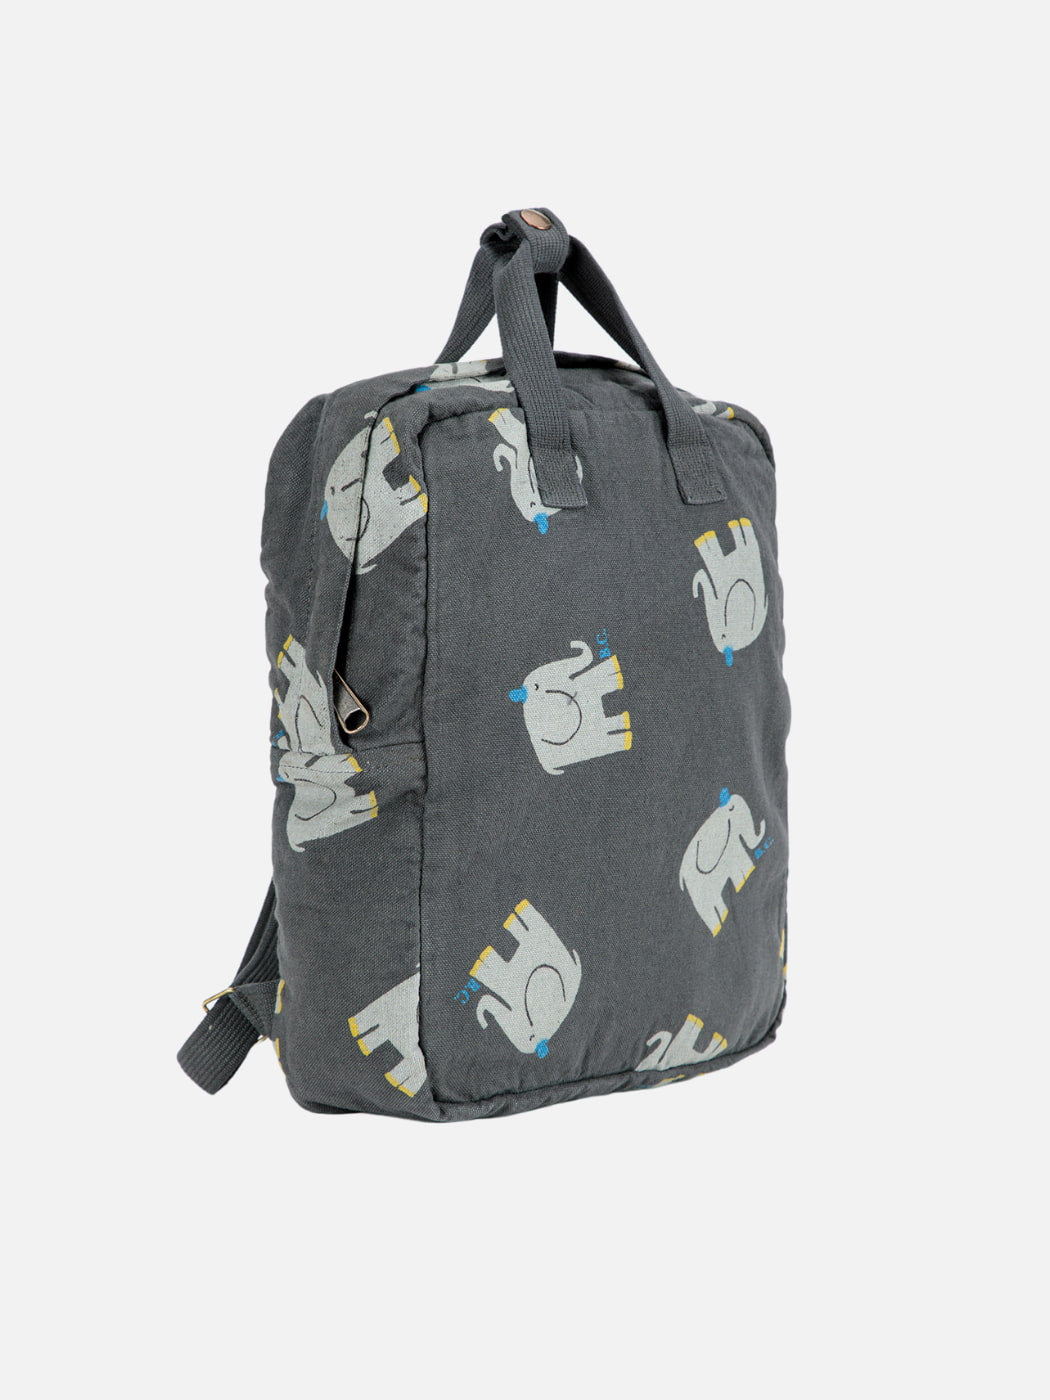 The Elephant All Over School Backpack